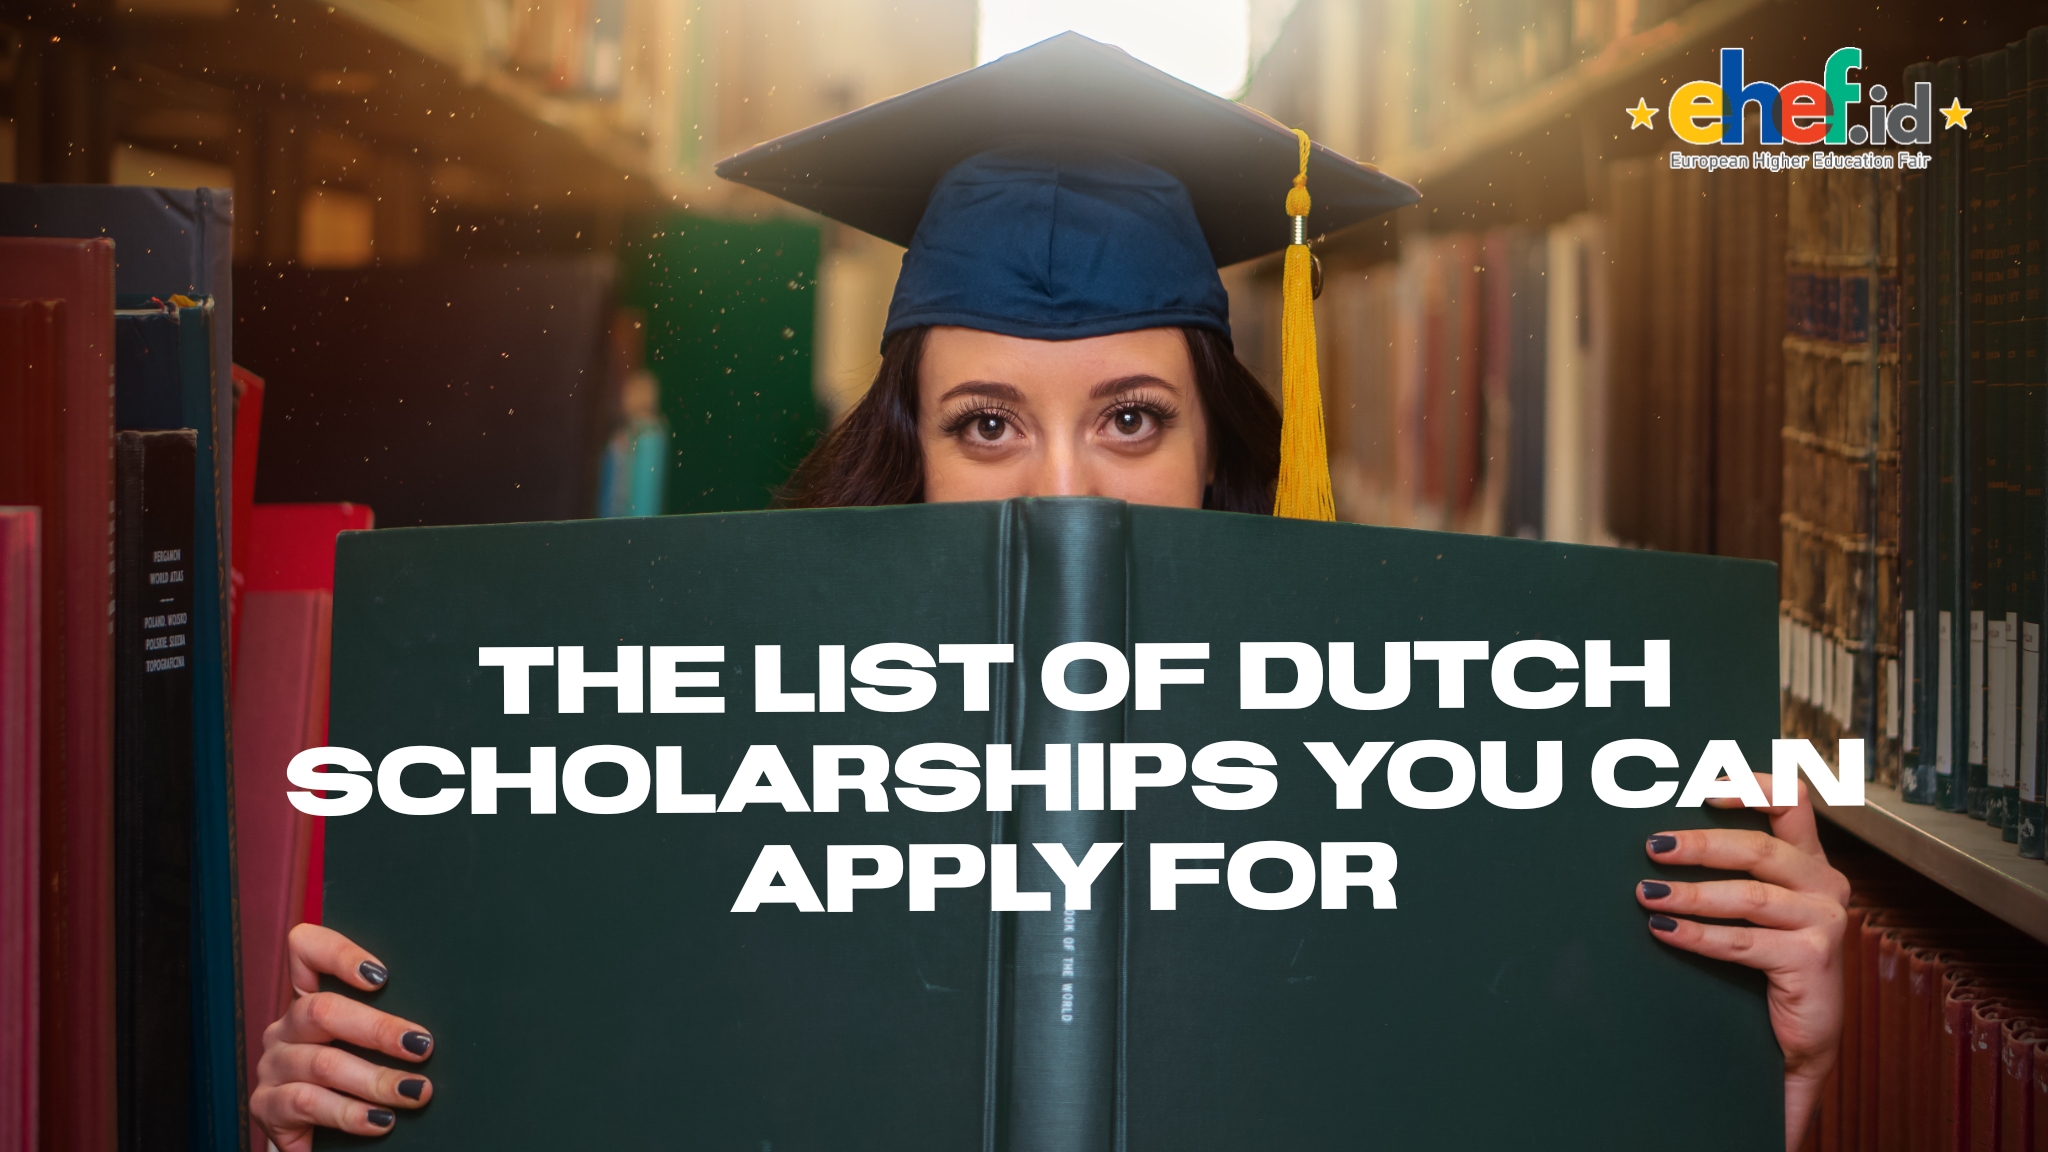 The List of Dutch Scholarships You Can Apply To